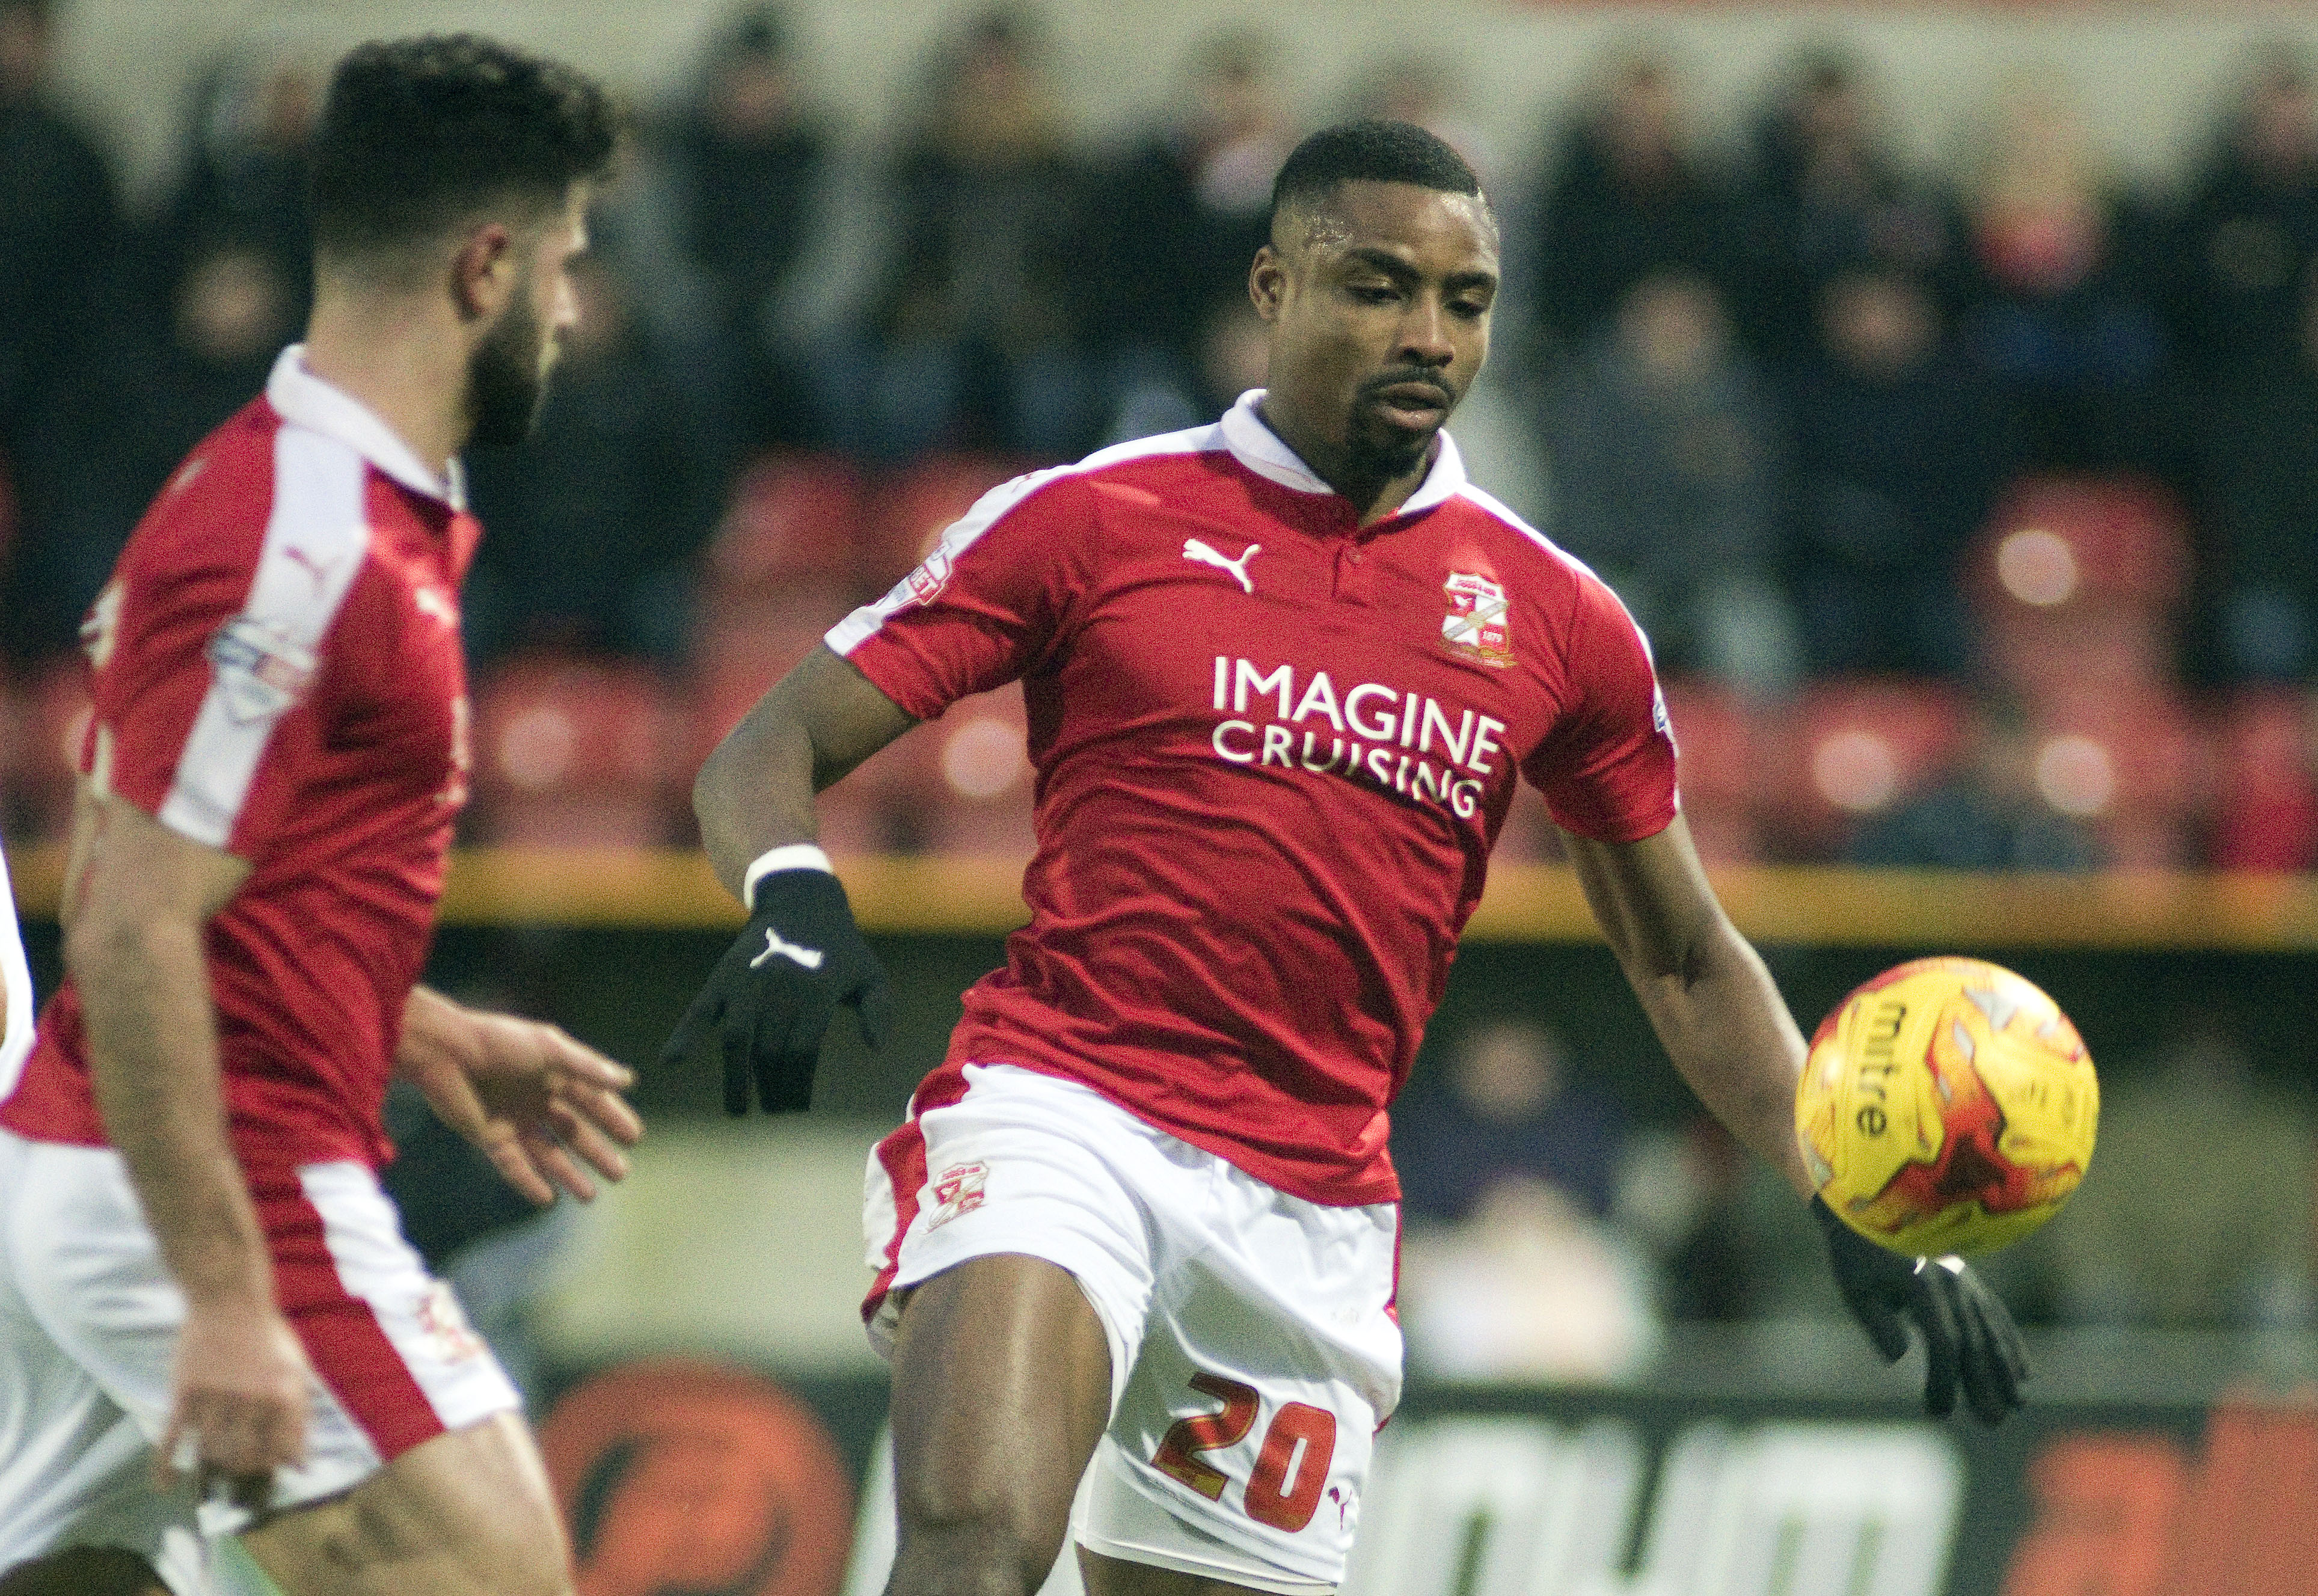 Obika won't be signing a new deal with STFC, says Power